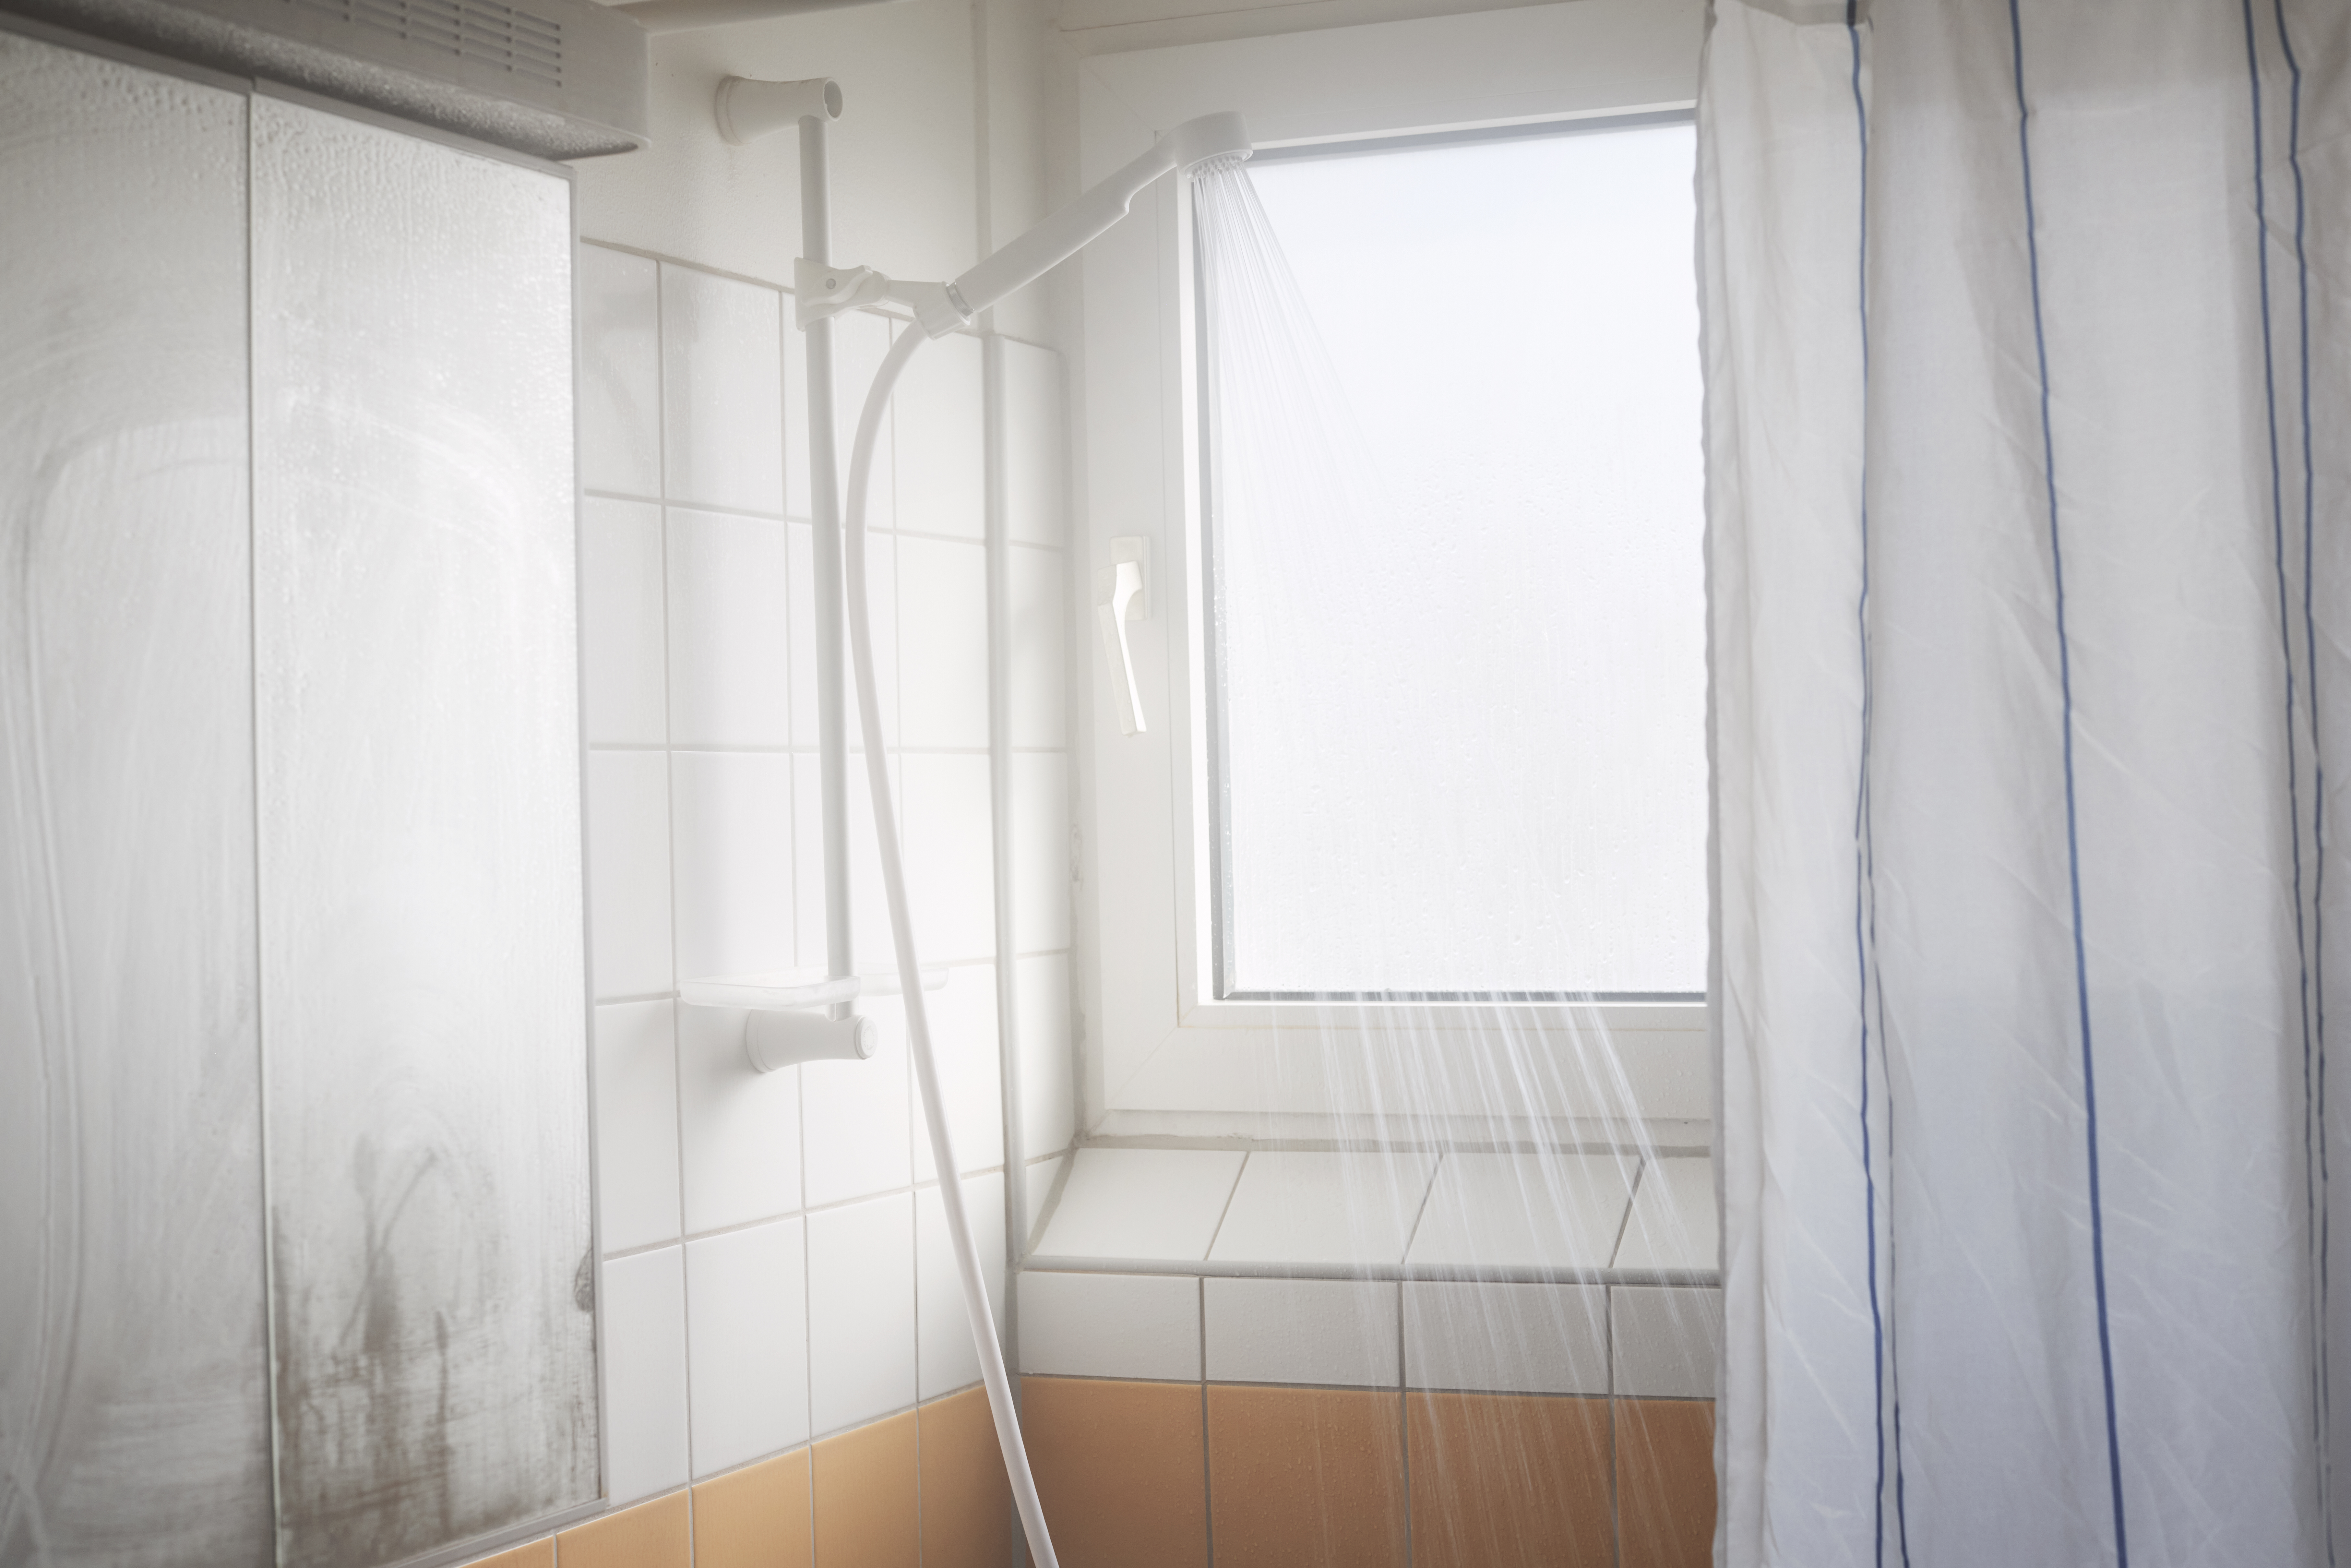 A steamy bathroom | Source: Getty Images